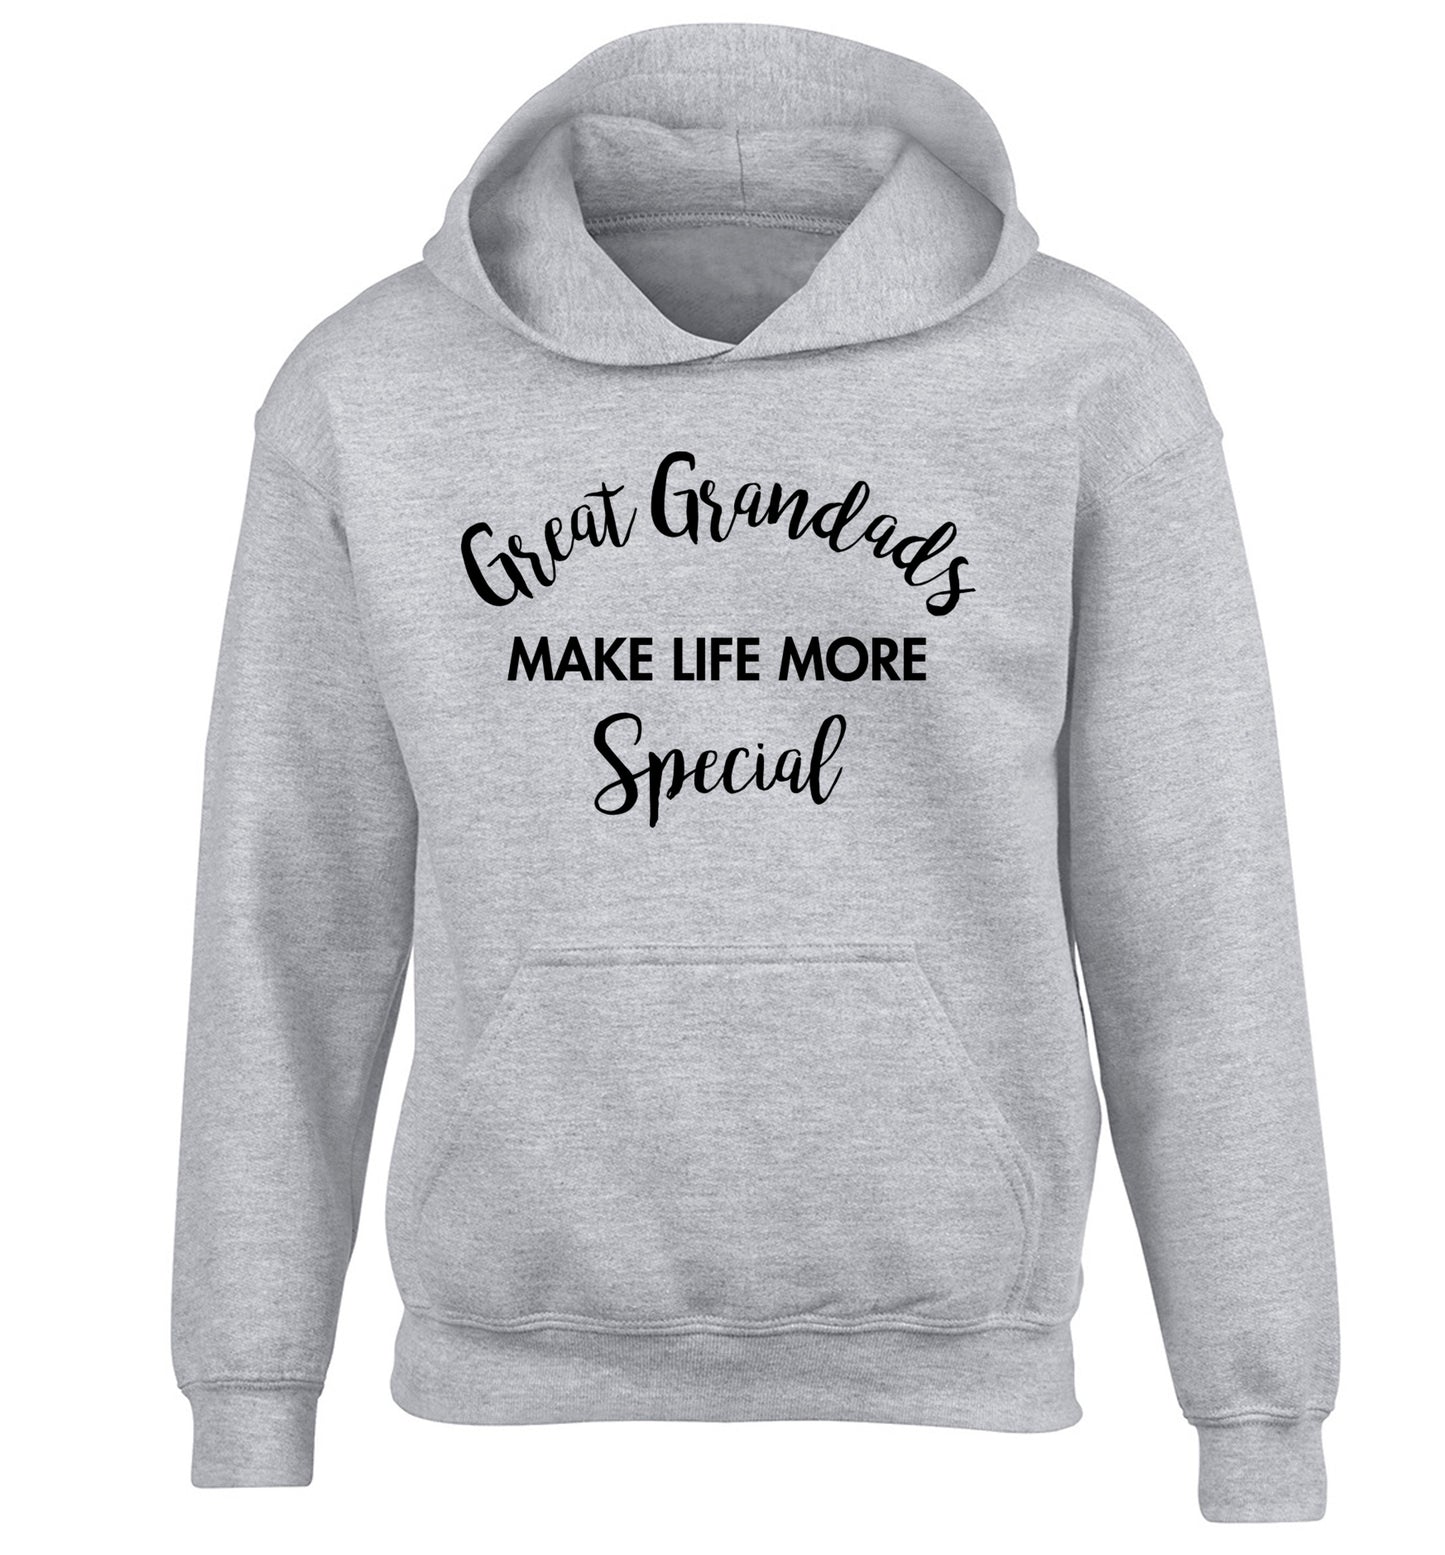 Great Grandads make life more special children's grey hoodie 12-14 Years